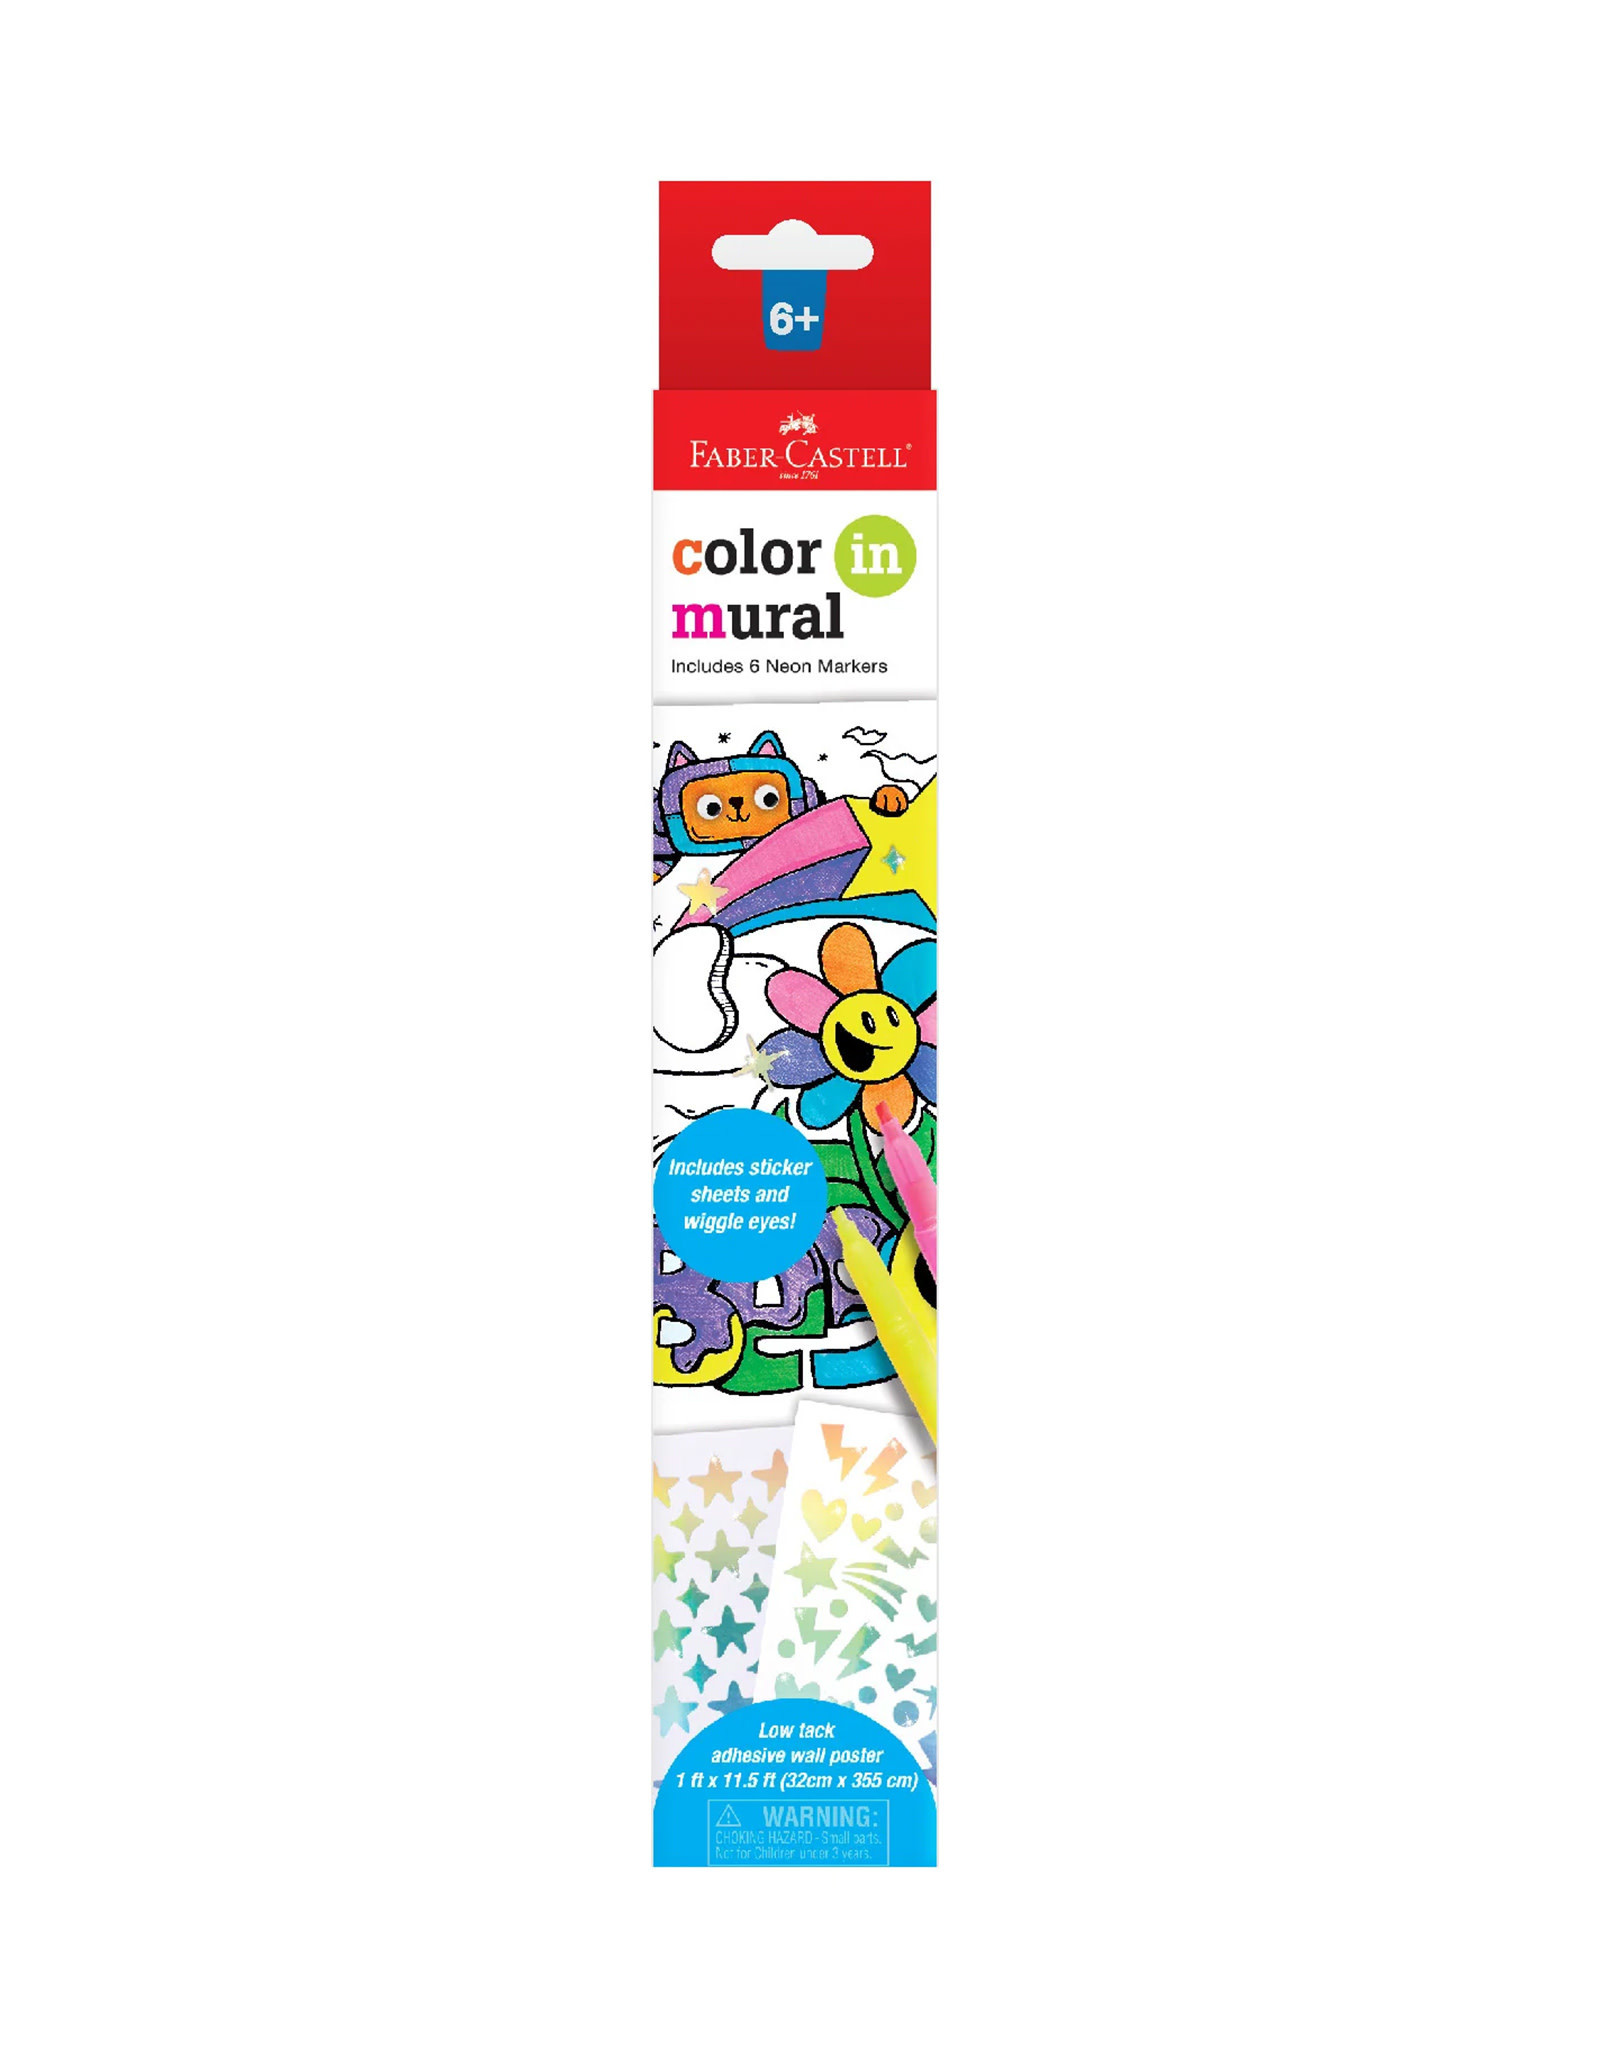 FABER-CASTELL Faber-Castell Color in Mural